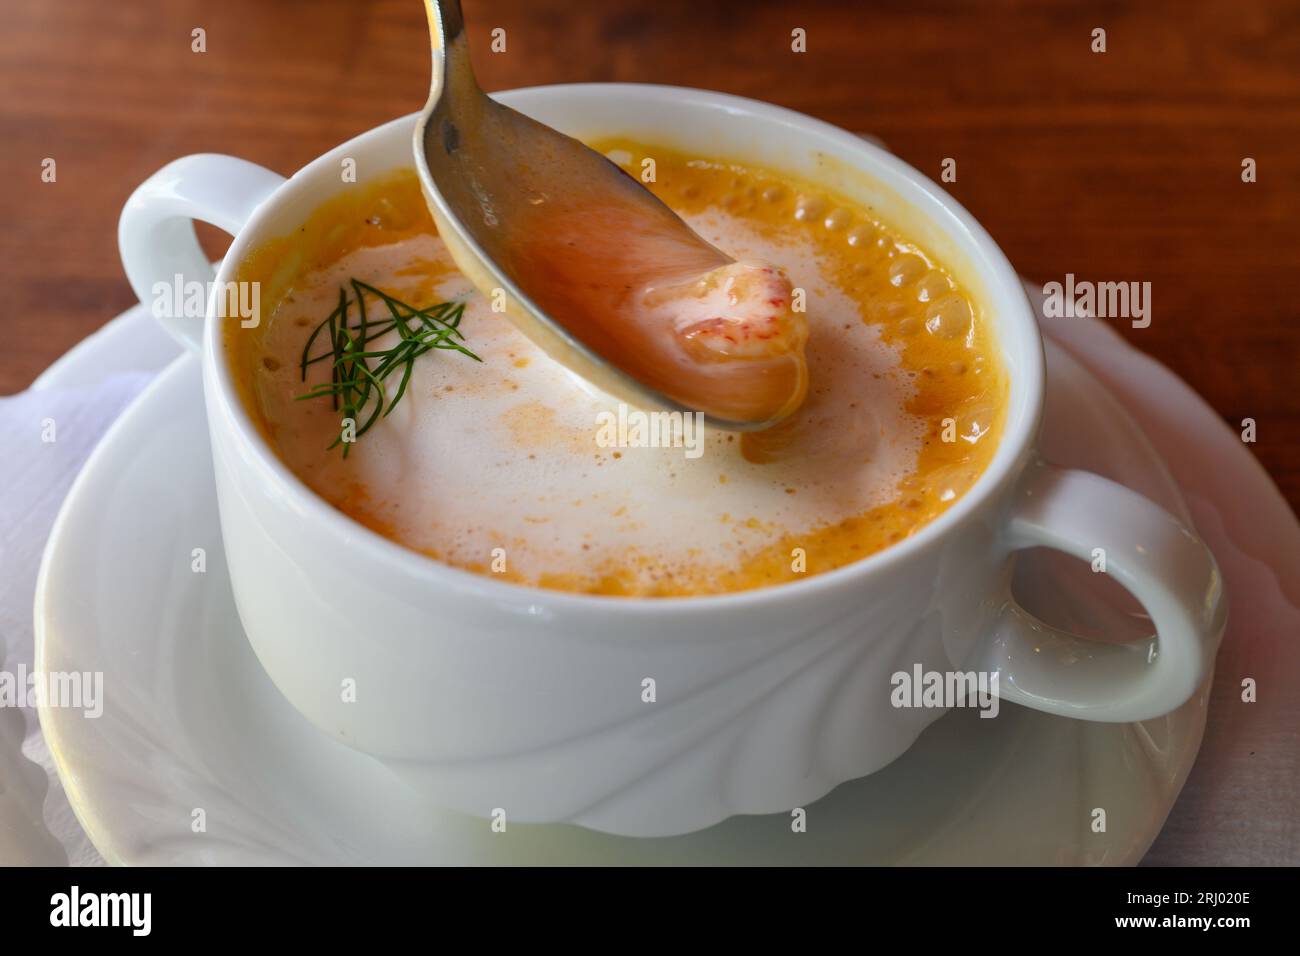 Busumer Krabbensuppe, Busom Style Soup with North Sea Crabs or Brown Shrimps on a Spoon in a White Bowl Stock Photo